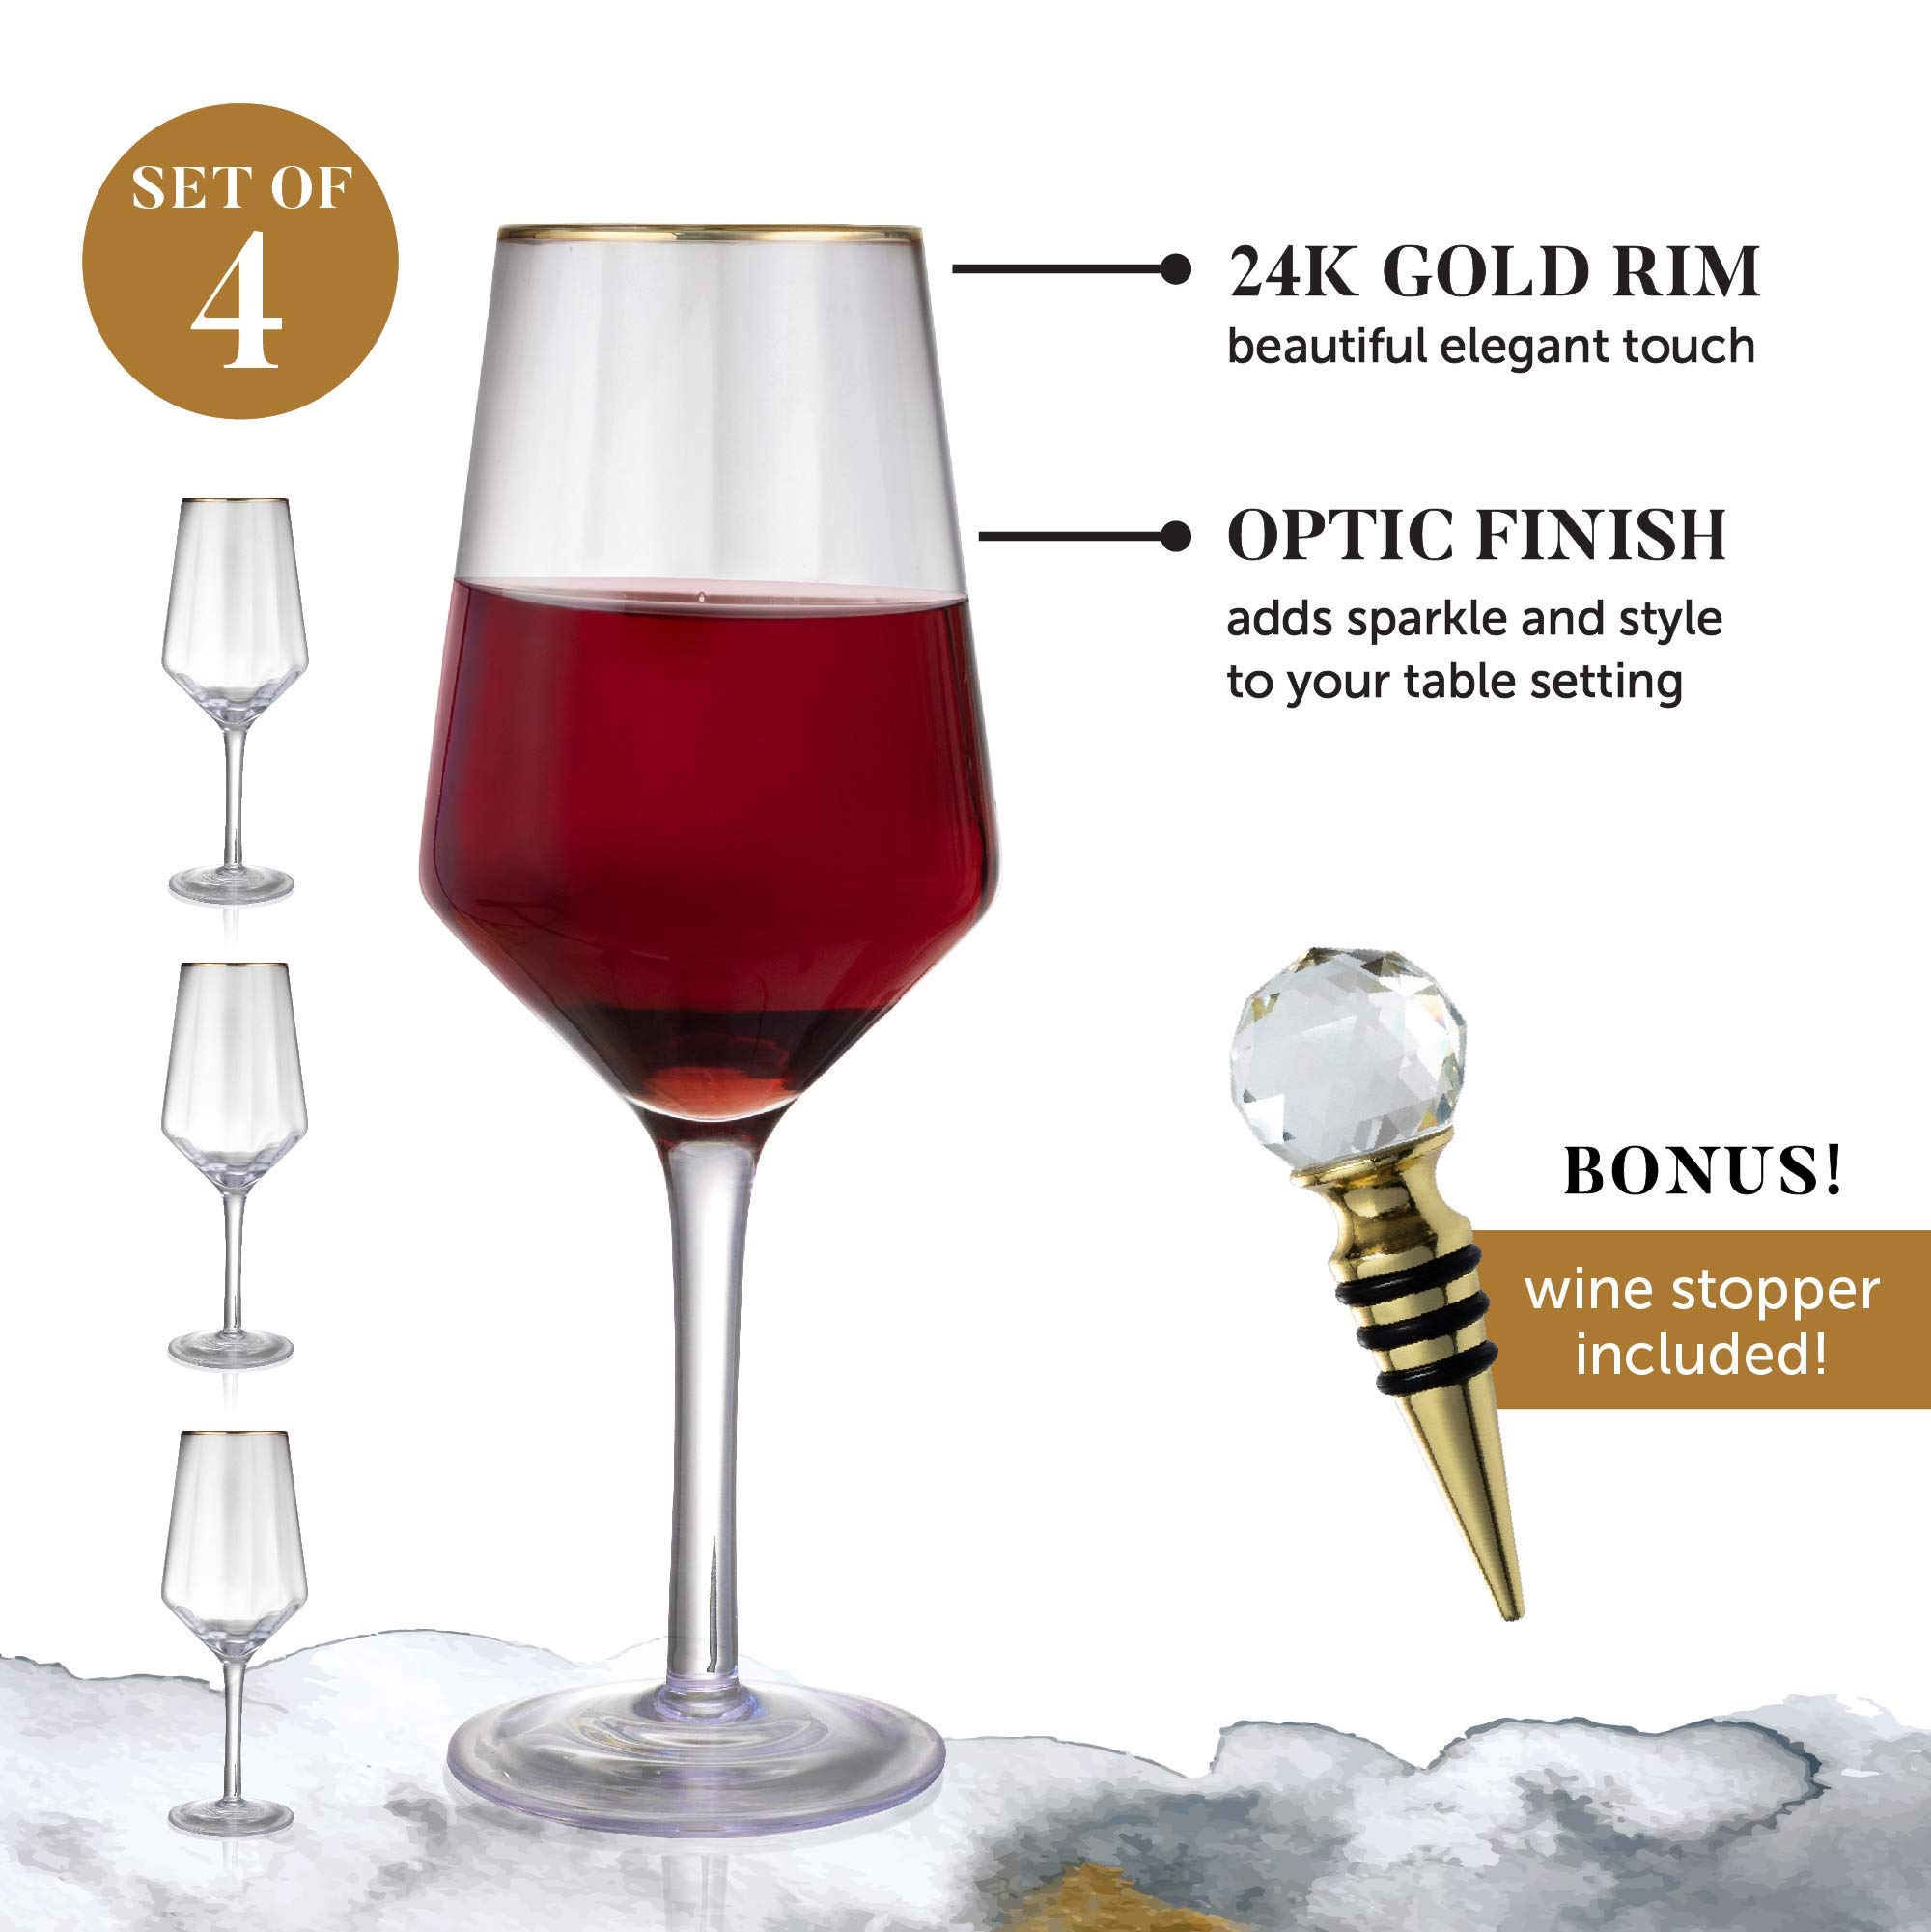 Hand Blown 15.5 Oz Wine Glasses - 24K Gold-Rim - Set of 4 Classic Crystal White & Red Wine Glass + Gold-Plated Wine Bottle Stopper - Lead-Free, Faceted Glass for Entertaining & Gifting by Lumi & Numi